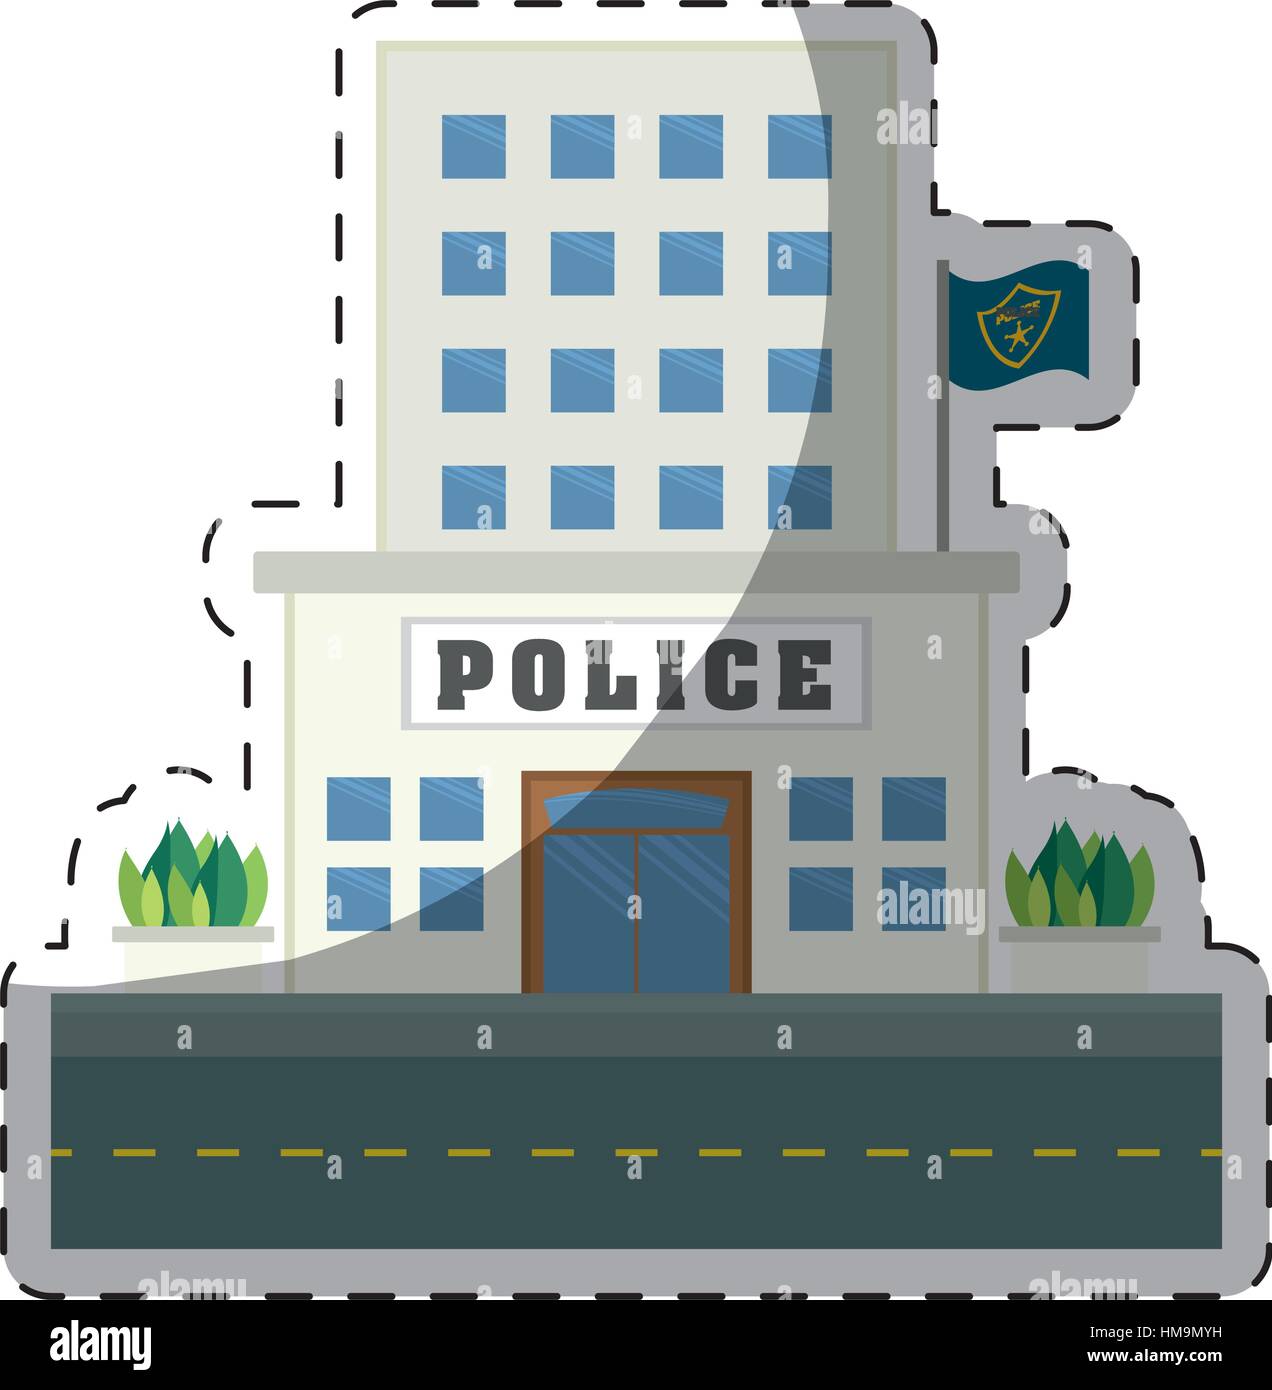 police station icon vector